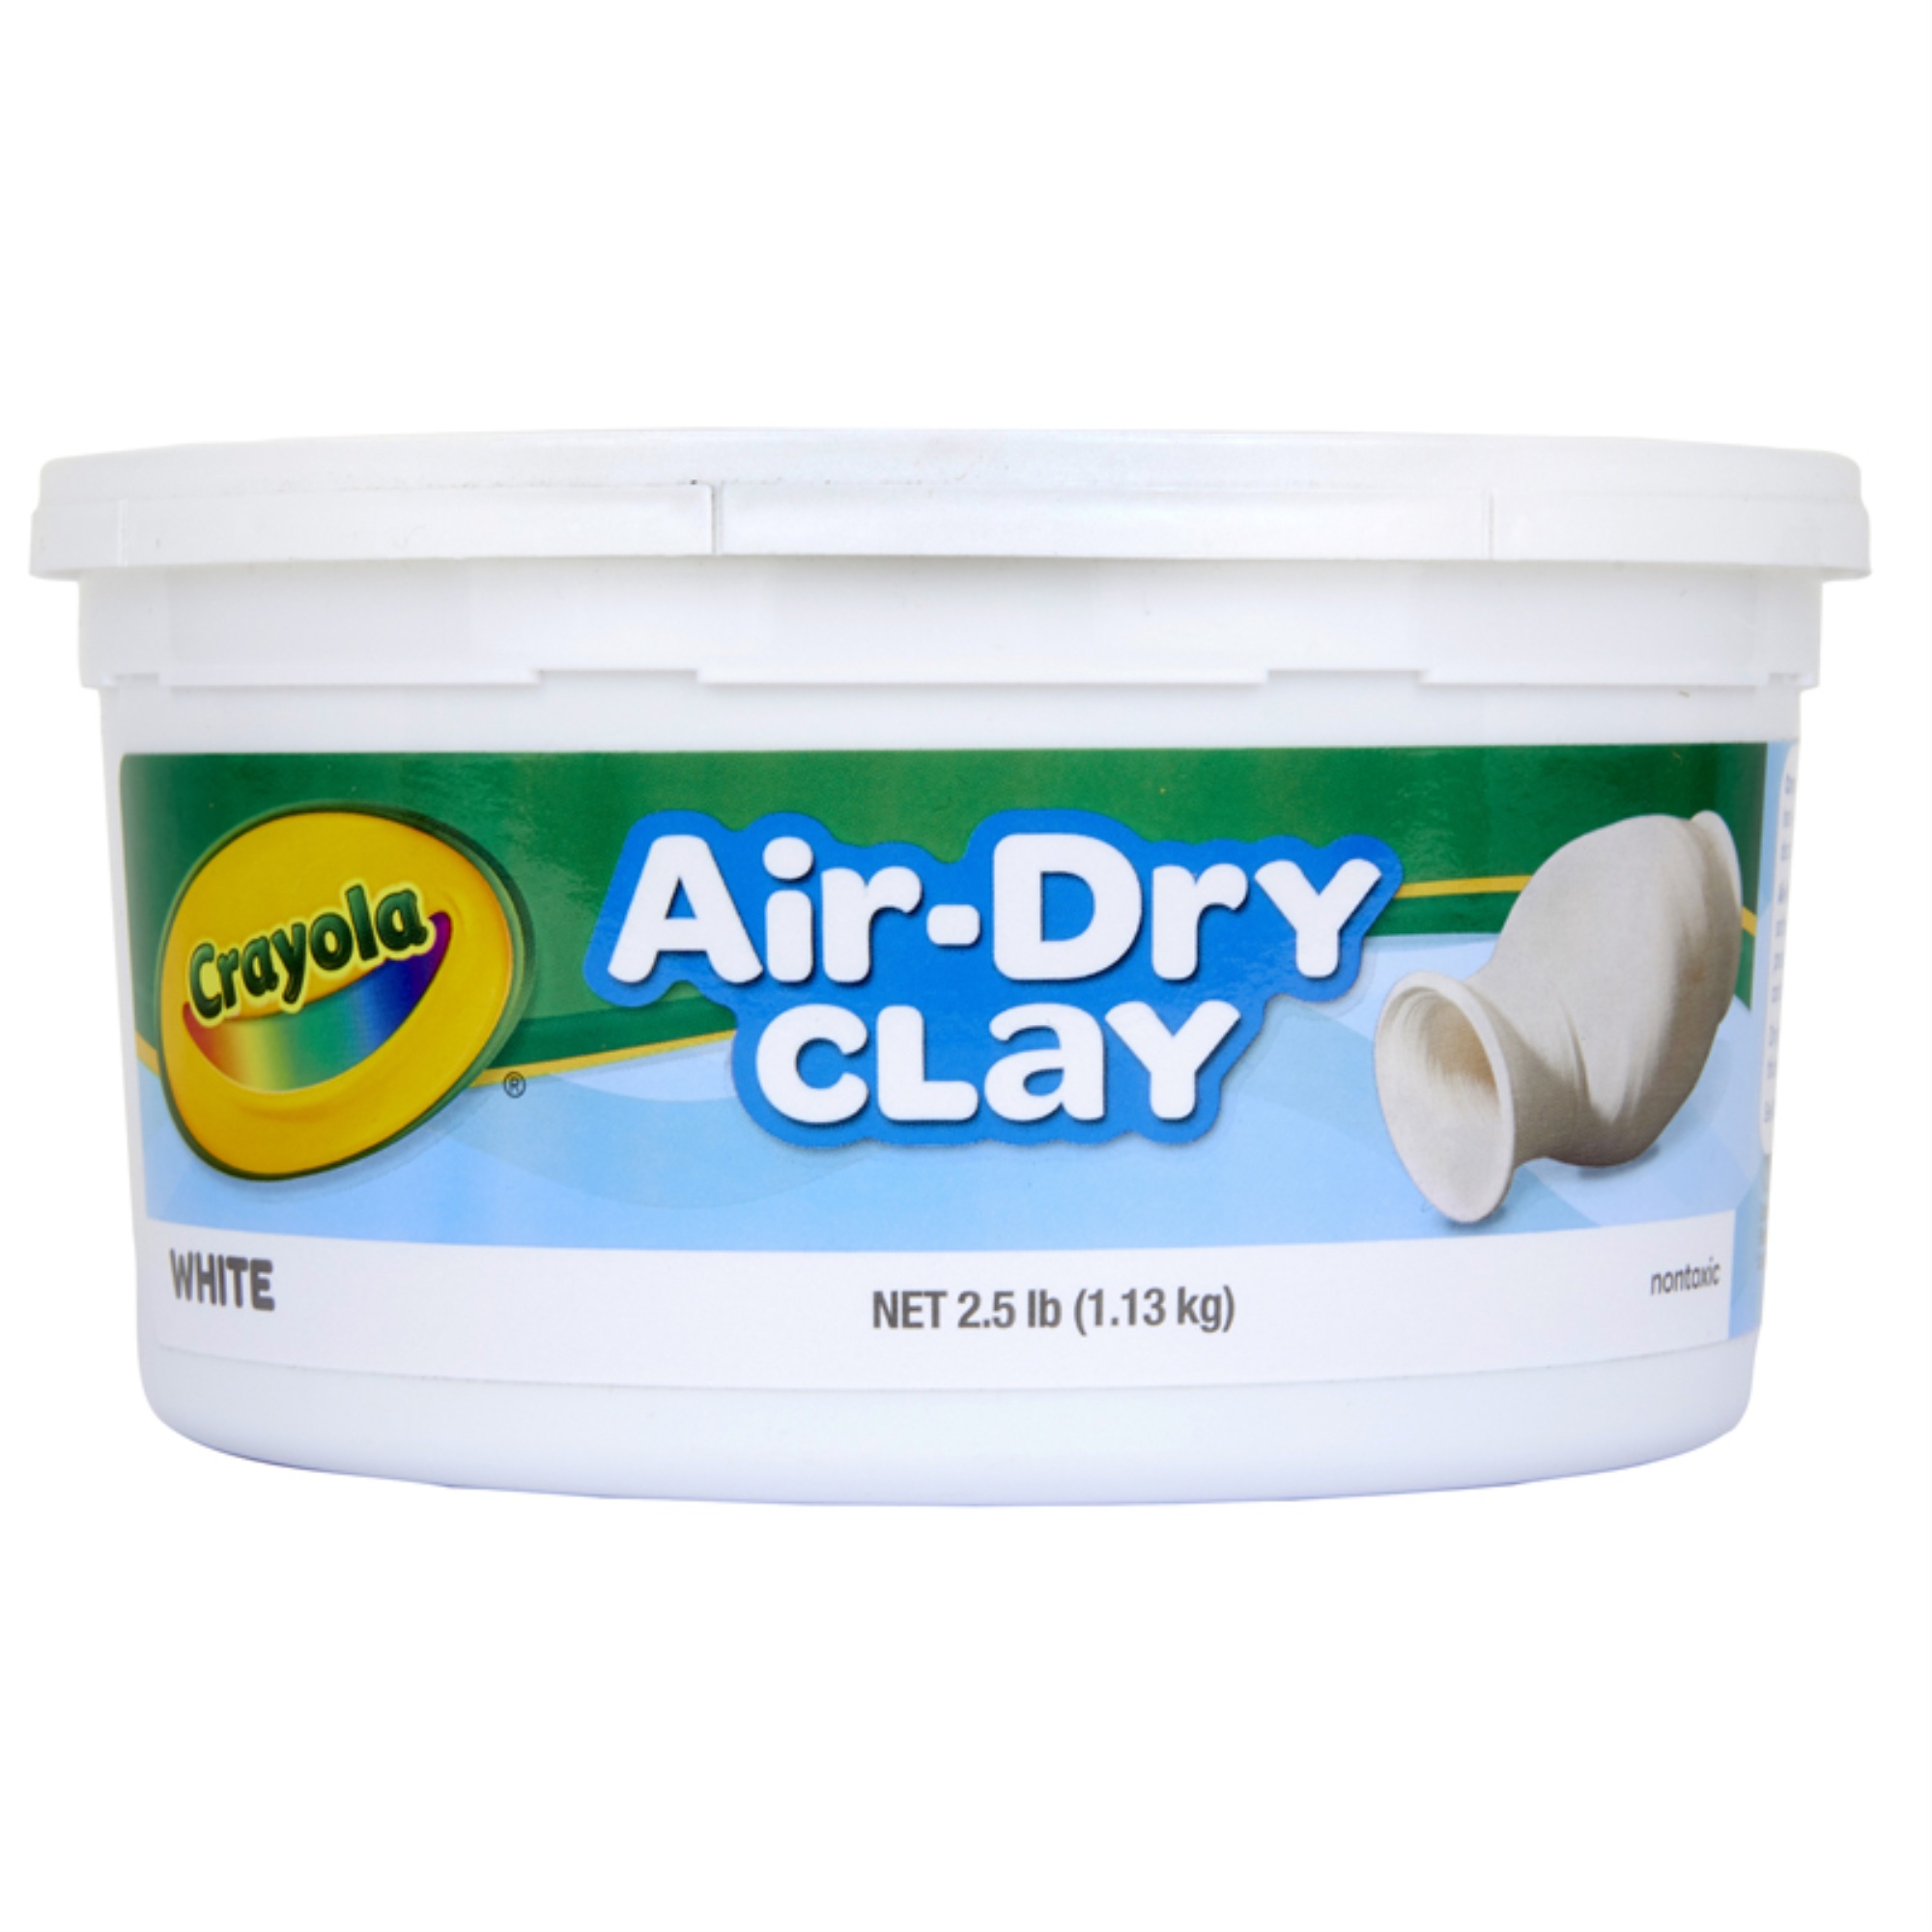 Crayola Air-Dry Clay, White, 2.5 Lb Resealable Bucket - image 1 of 11